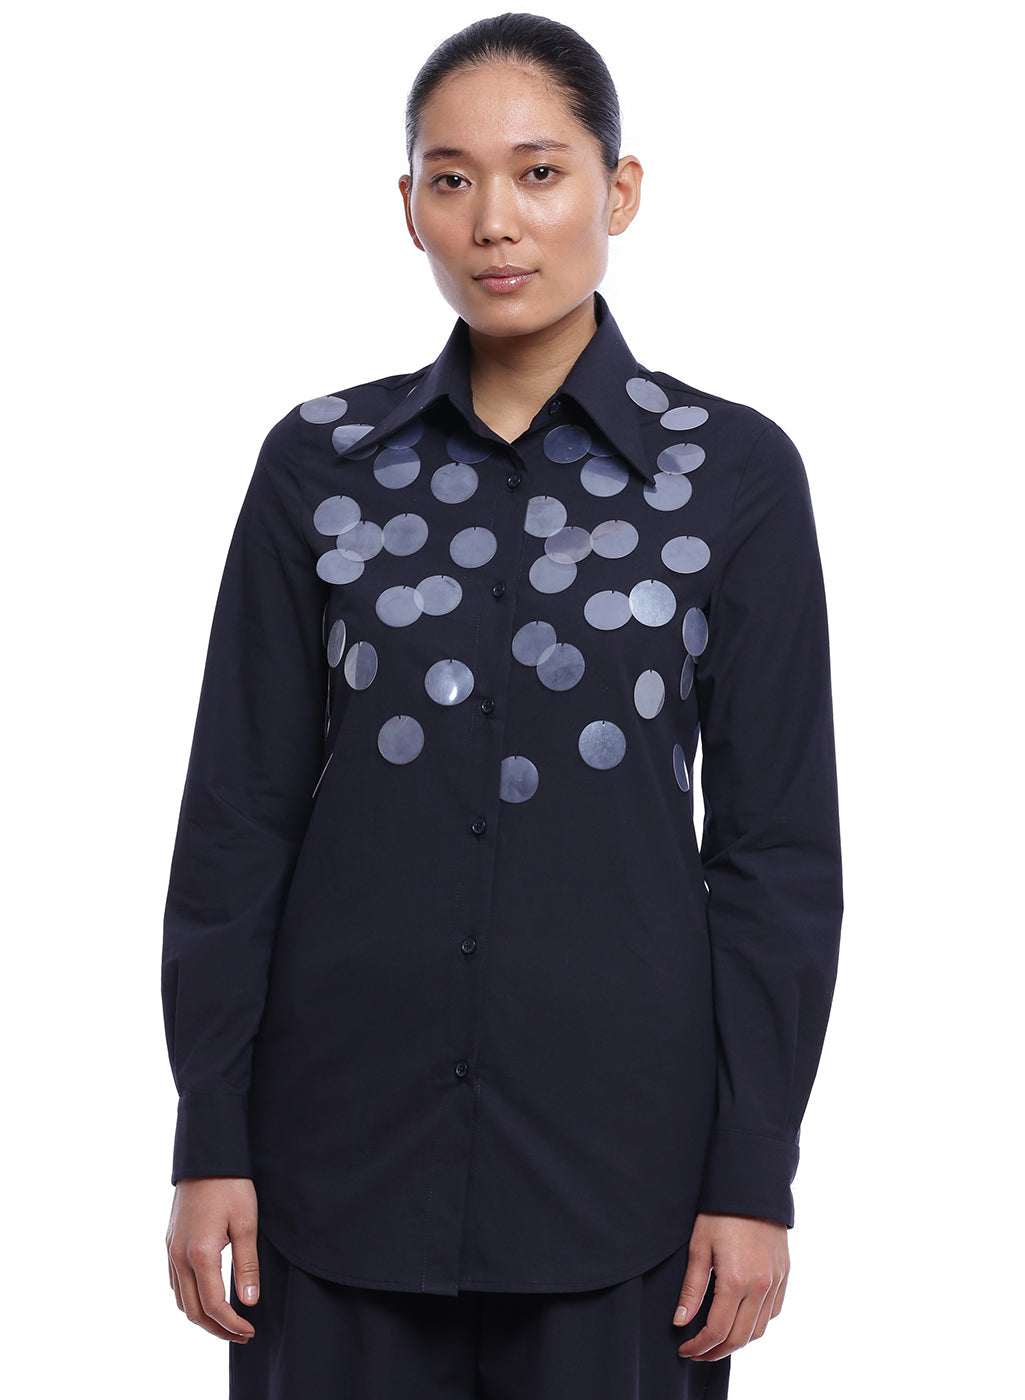 Sequin Embroidered Shirt - Genes online store 2020